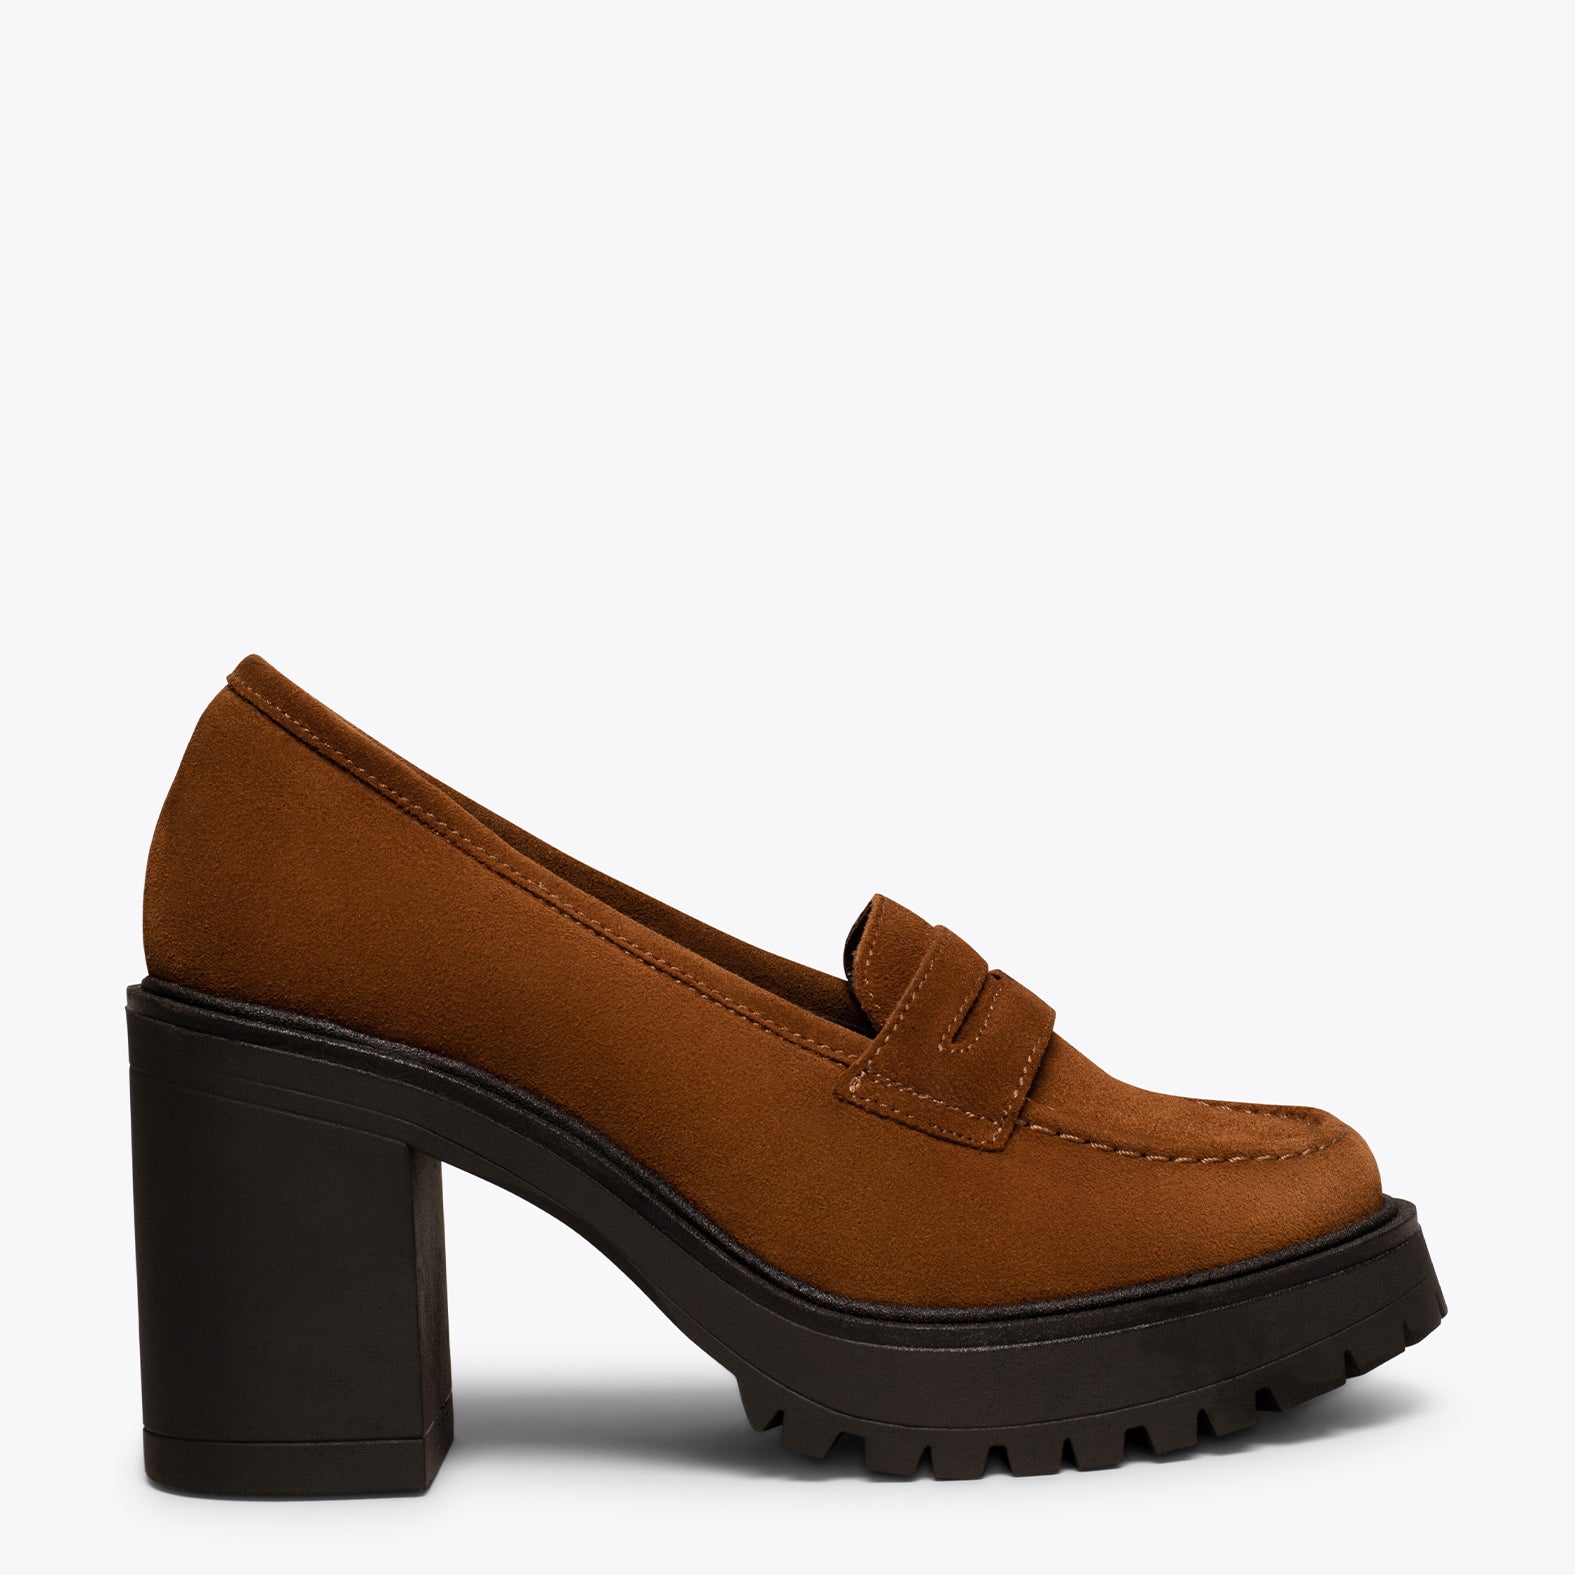 TRACK – CAMEL high heel moccasin with track sole